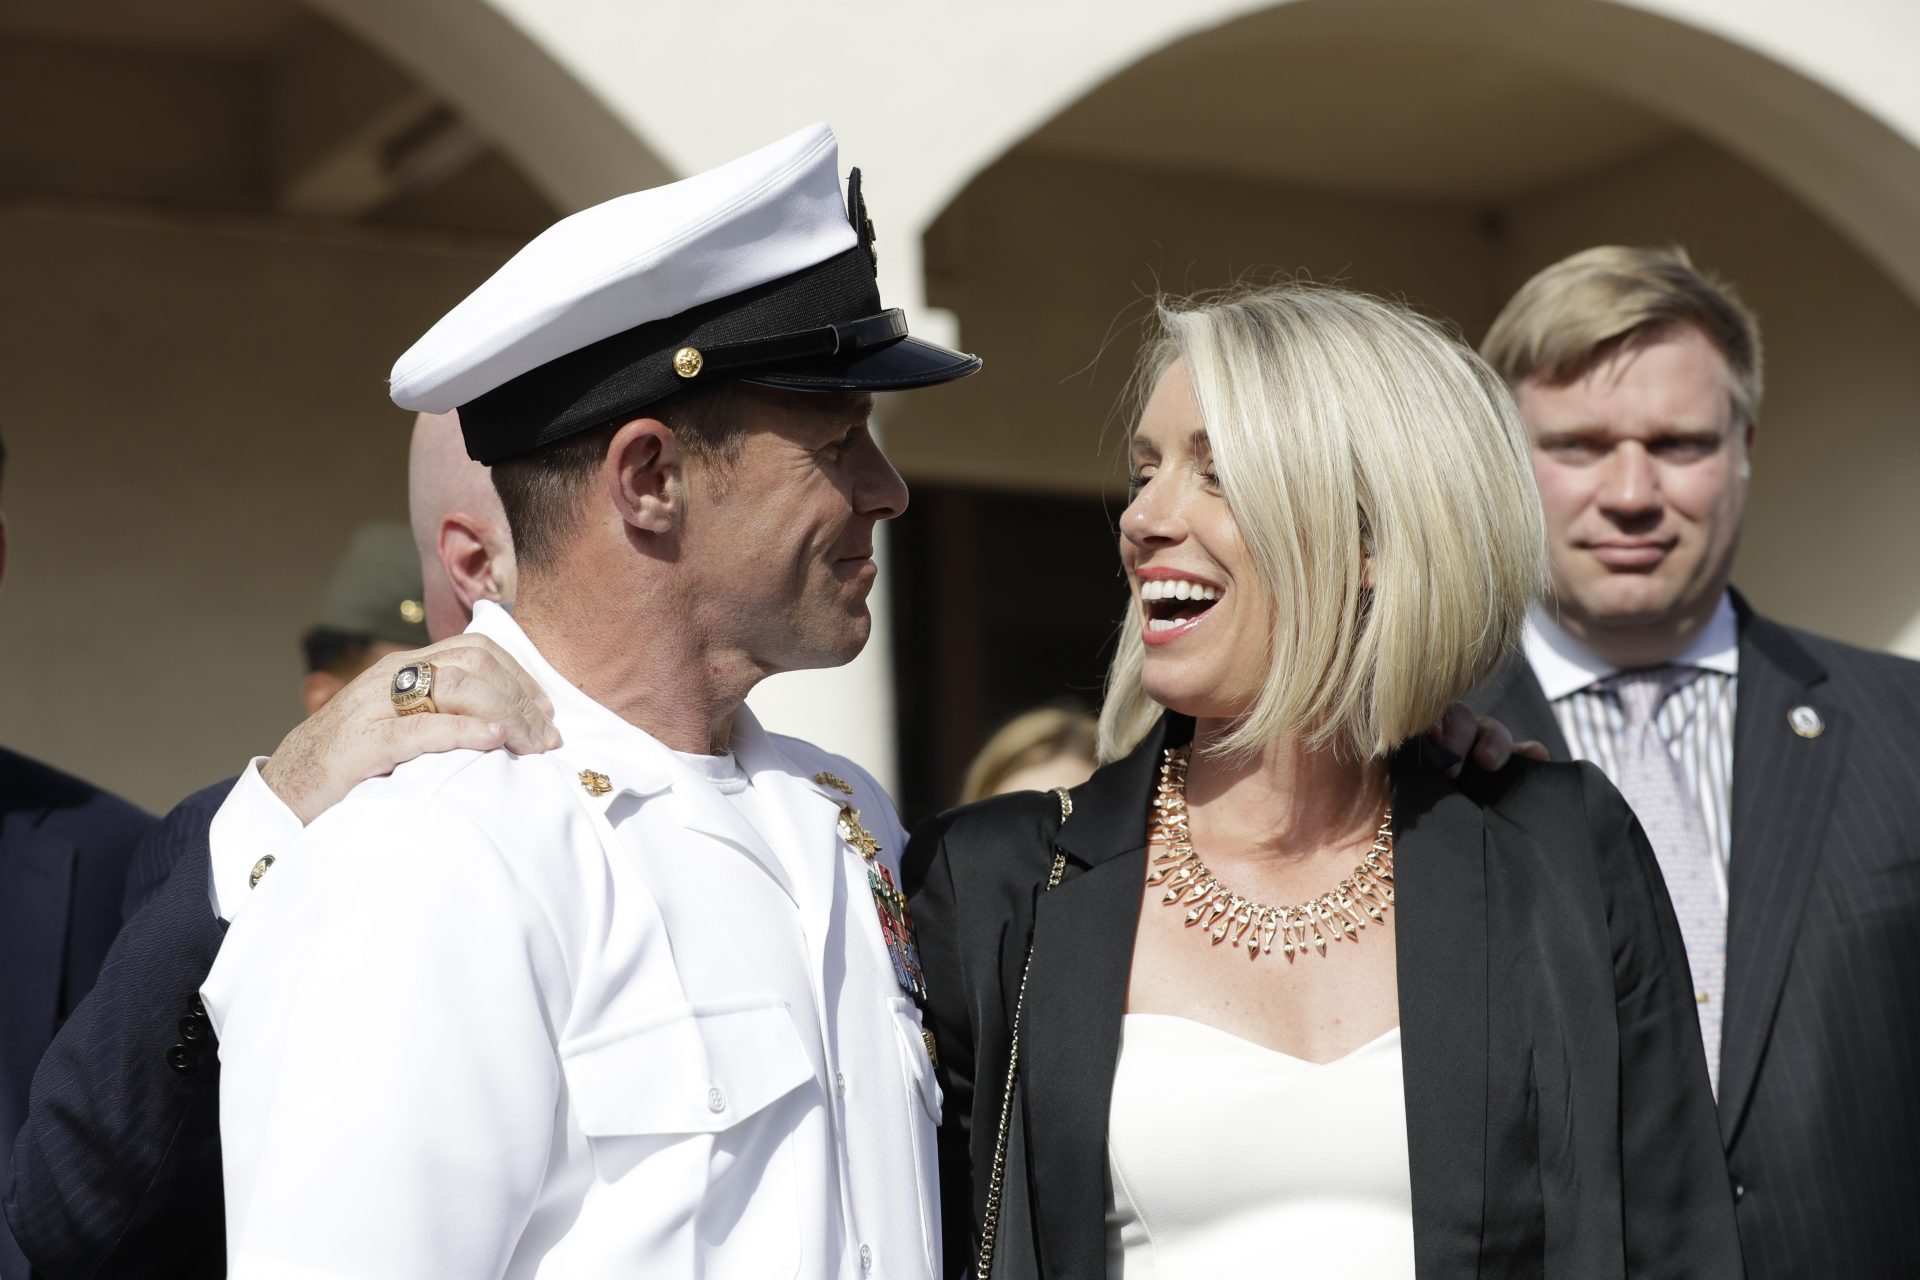 Navy Special Operations Chief Edward Gallagher, left, and his wife, Andrea Gallagher smile after leaving a military court on Naval Base San Diego, Tuesday, July 2, 2019, in San Diego. A military jury acquitted a decorated Navy SEAL of premeditated murder Tuesday in the killing of a wounded Islamic State captive under his care in Iraq in 2017.